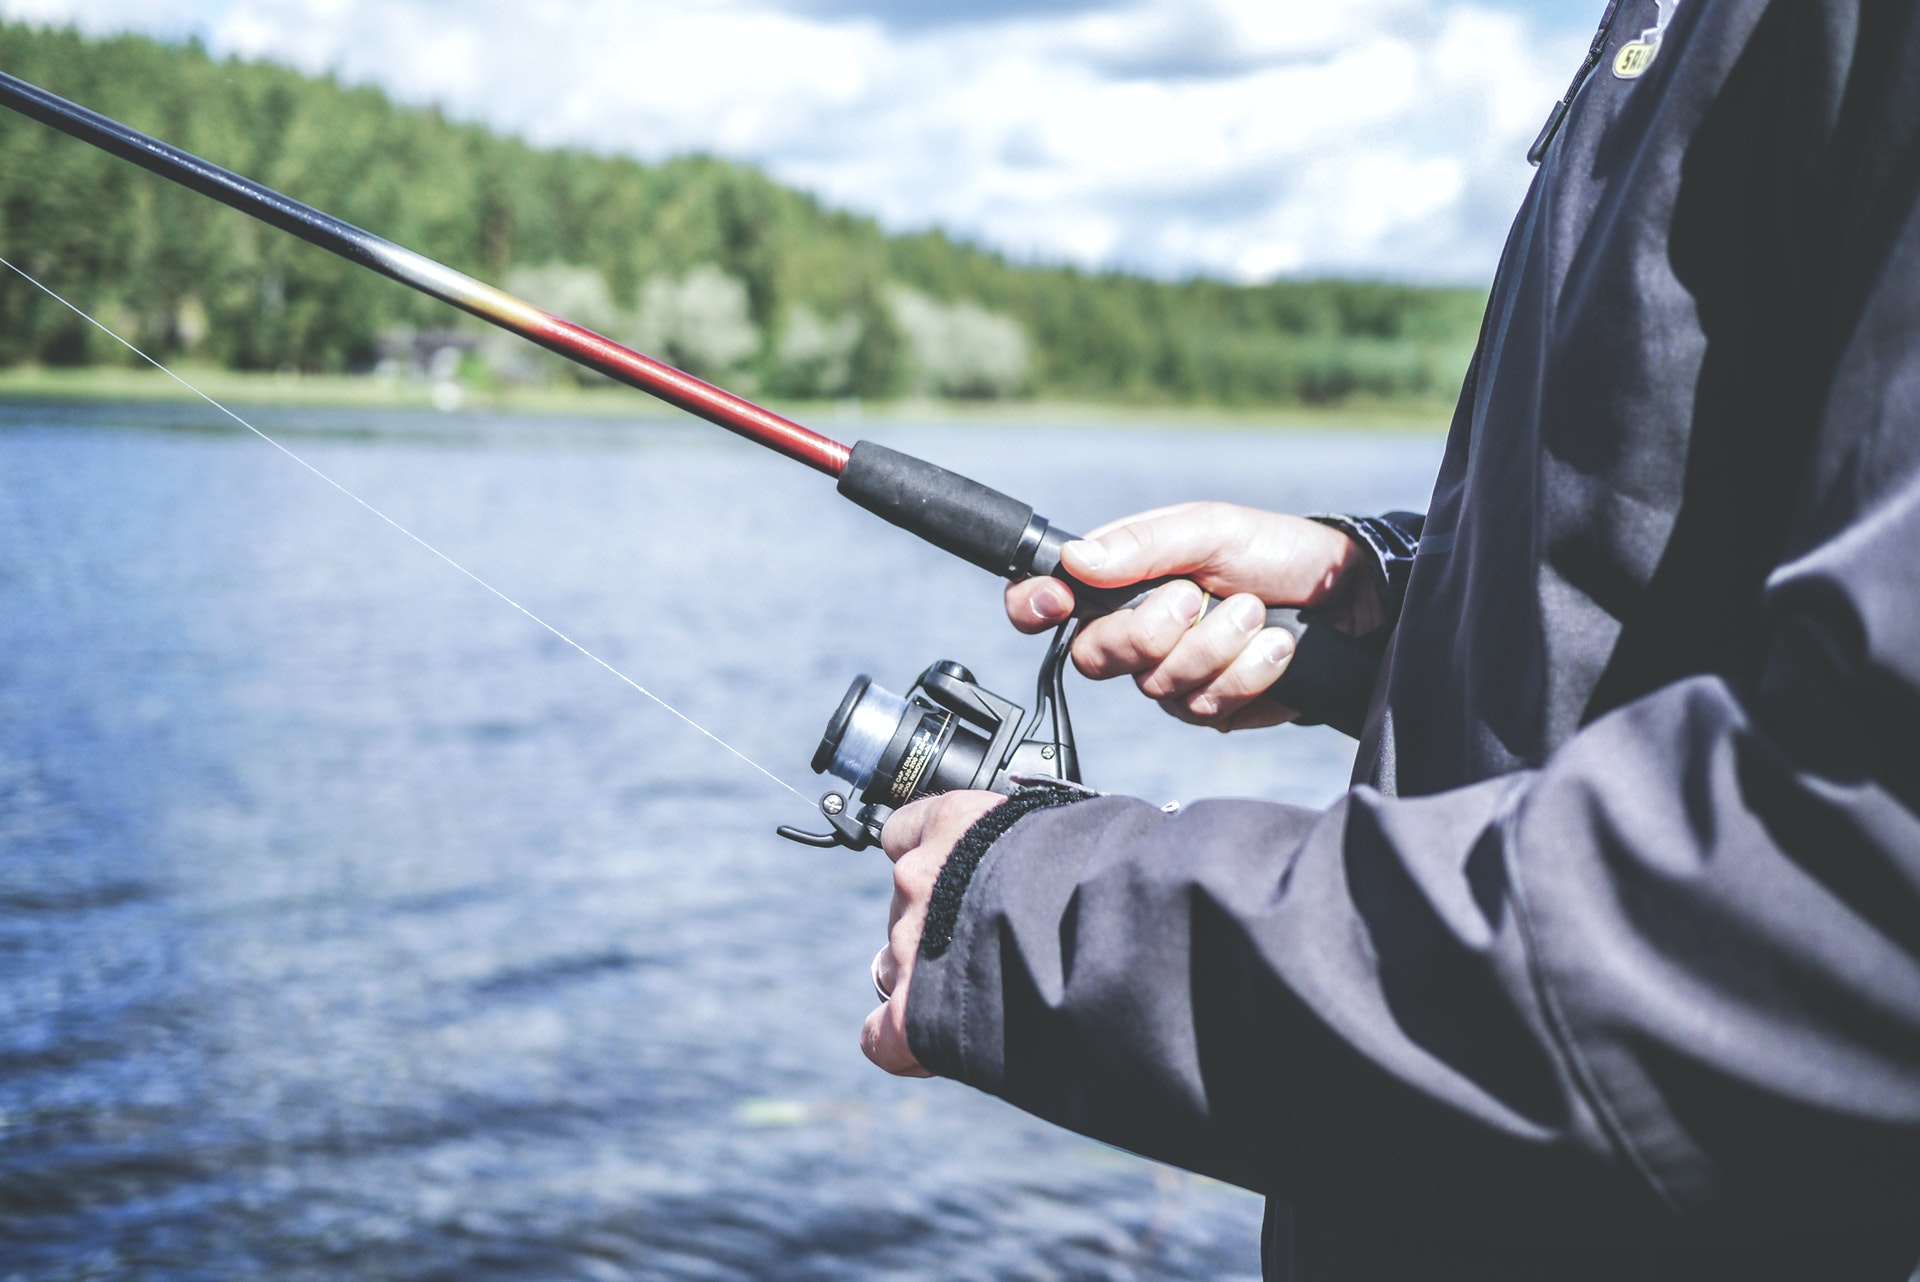 Prep Like a Pro for a Fishing Trip